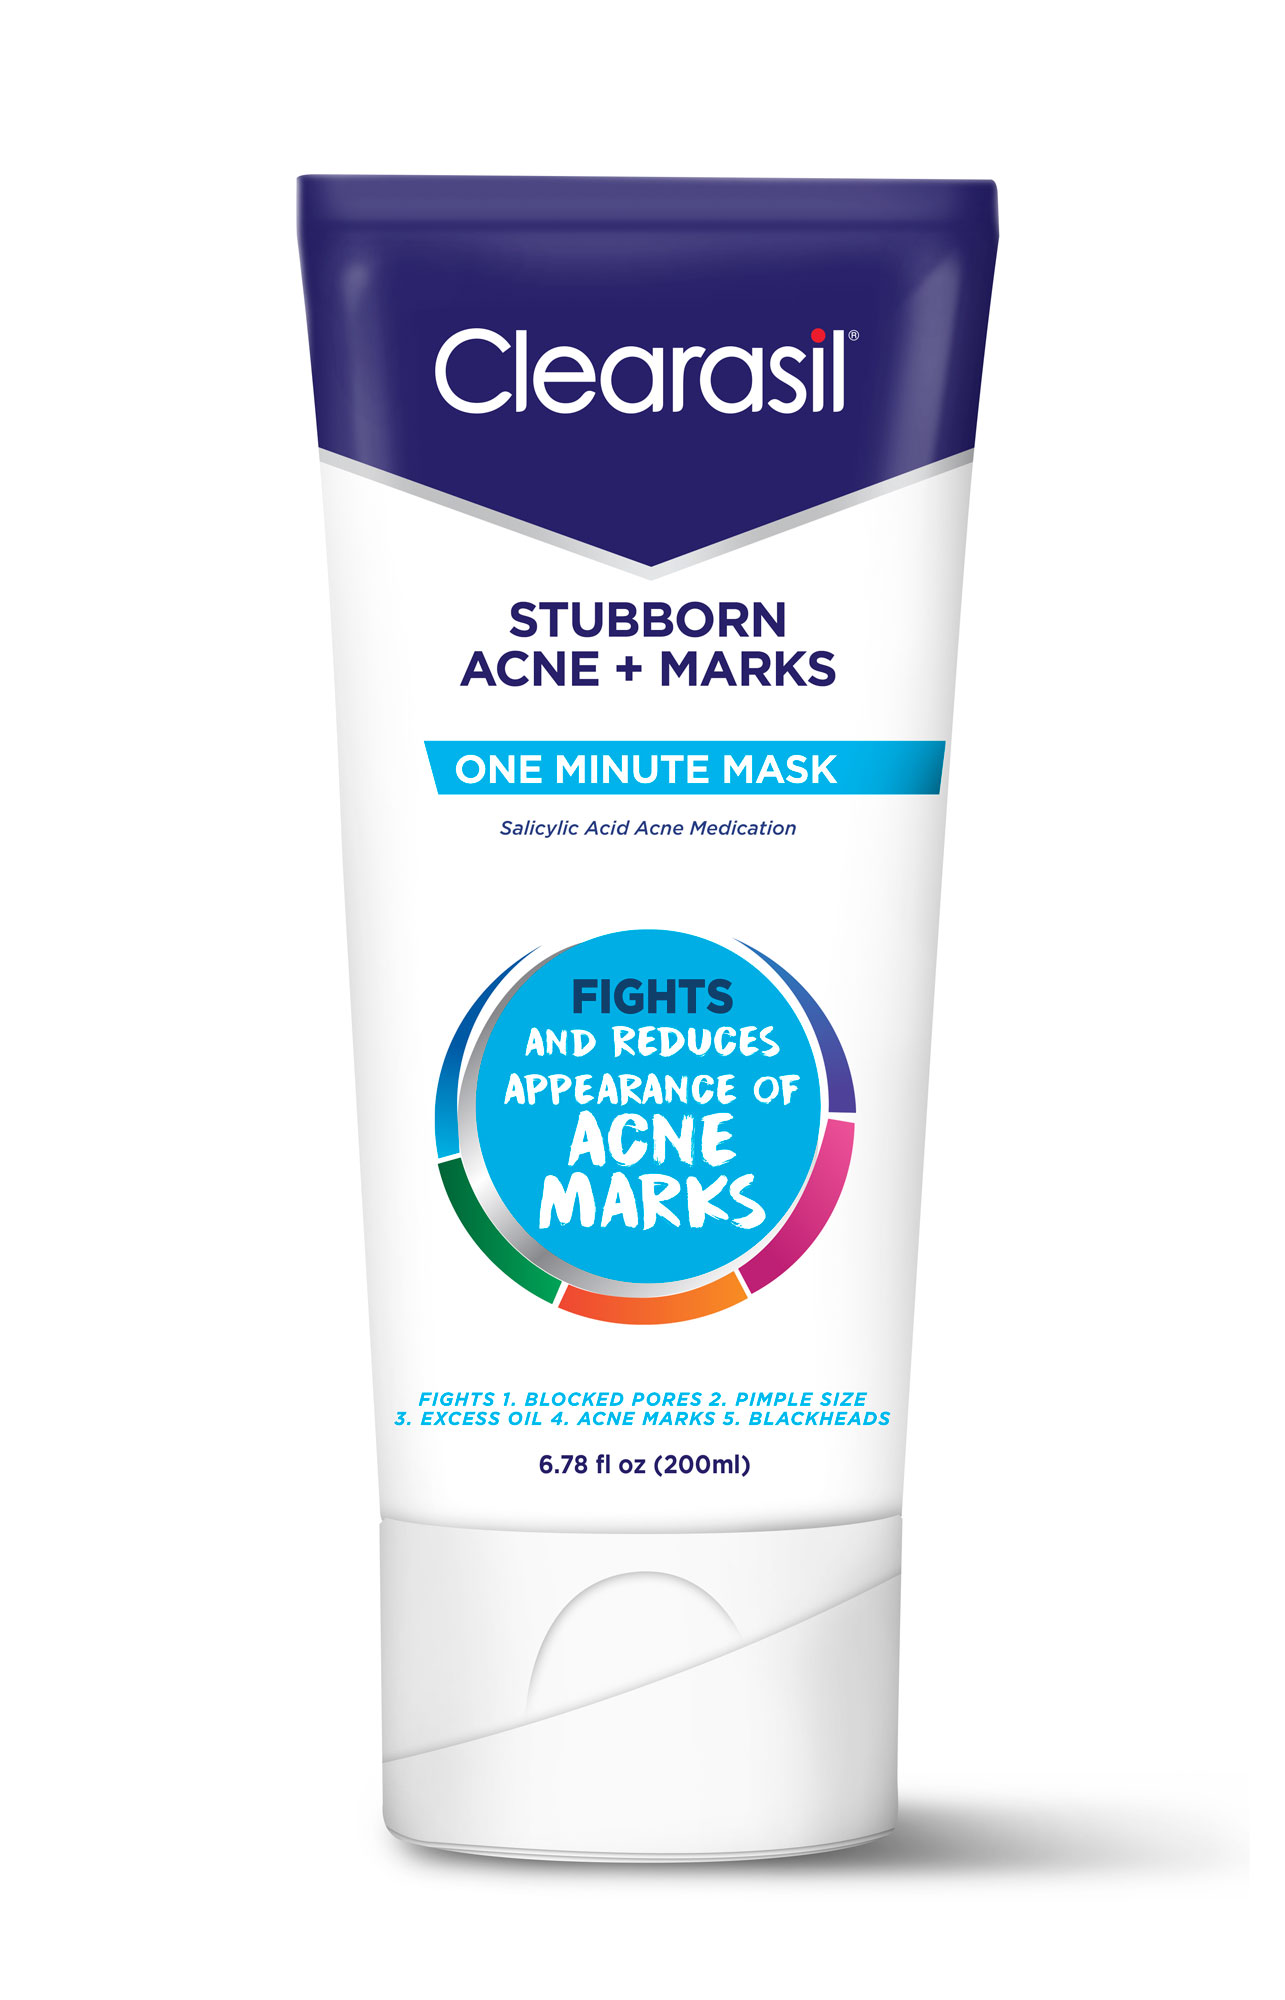 CLEARASIL Stubborn Acne Control One Minute Mask Discontinued 5112021